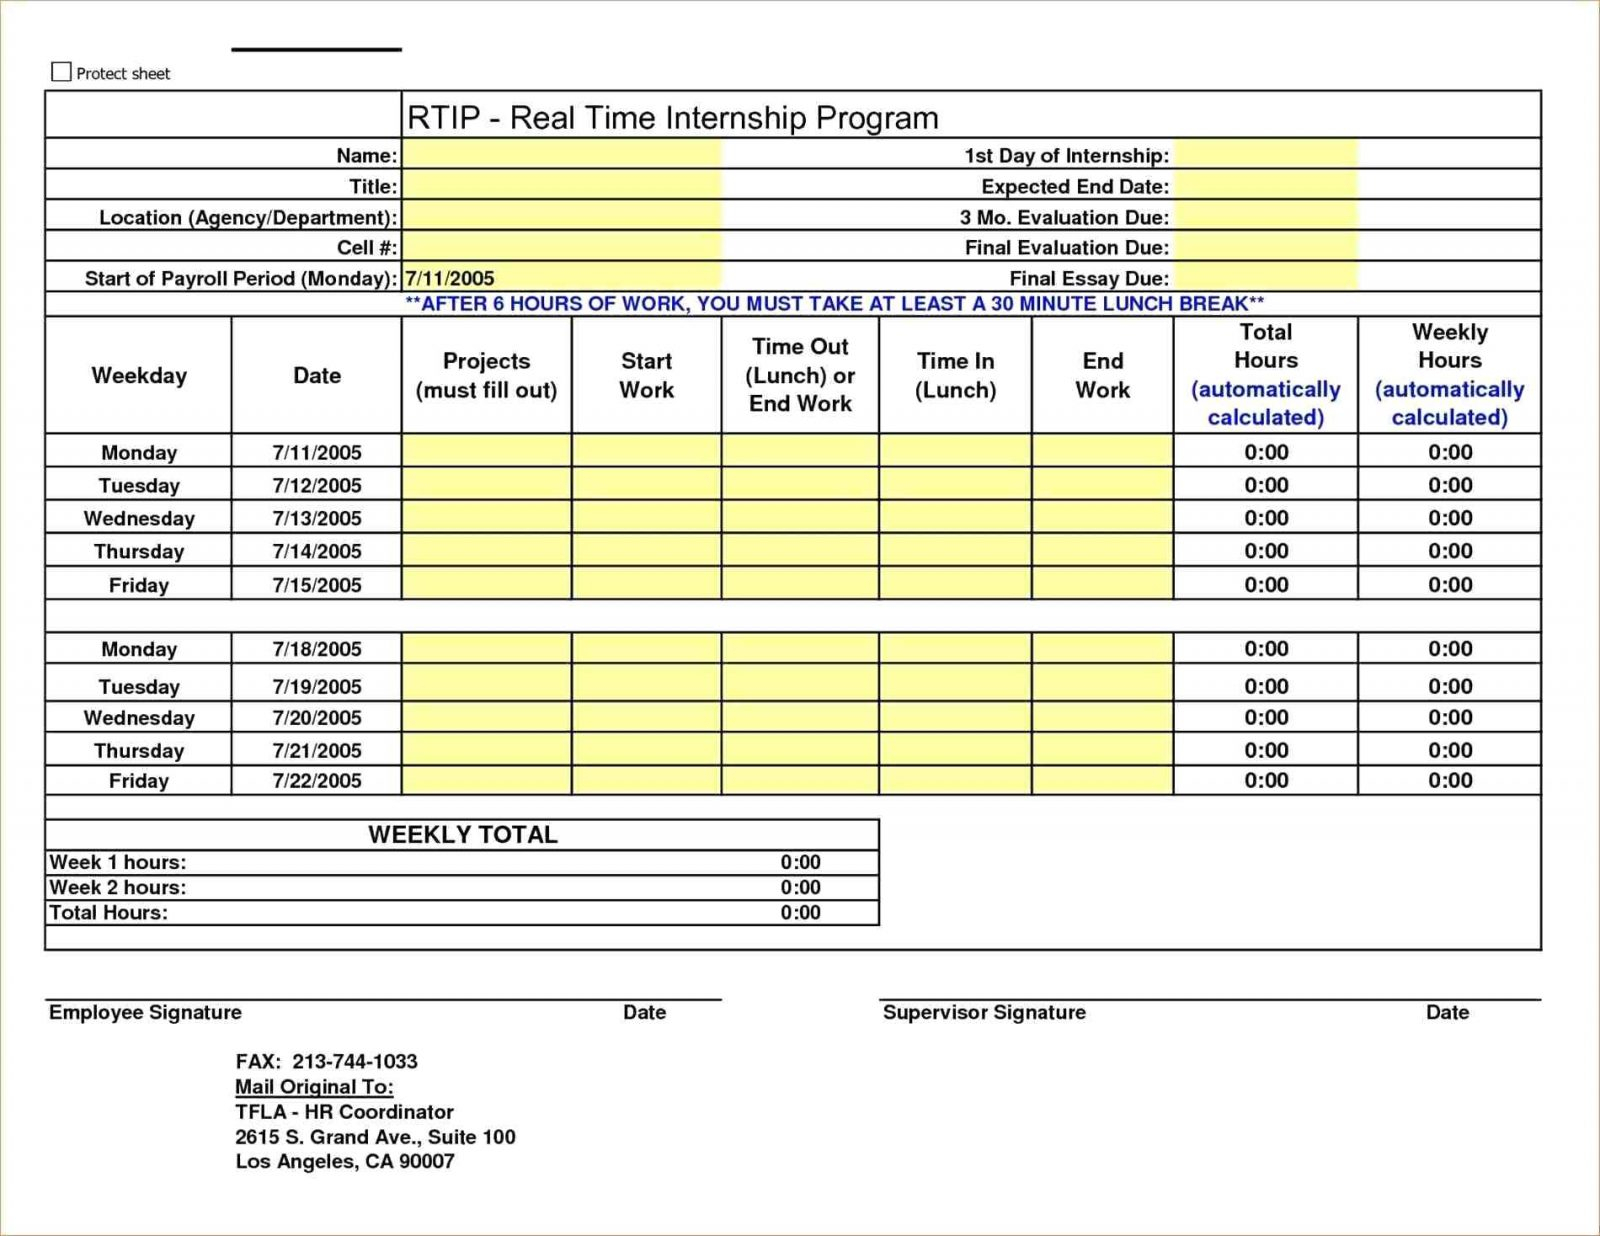 Hour Tracking Spreadsheet For Employee Hours Tracking Spreadsheet Absenteeism Maxresdefault Time